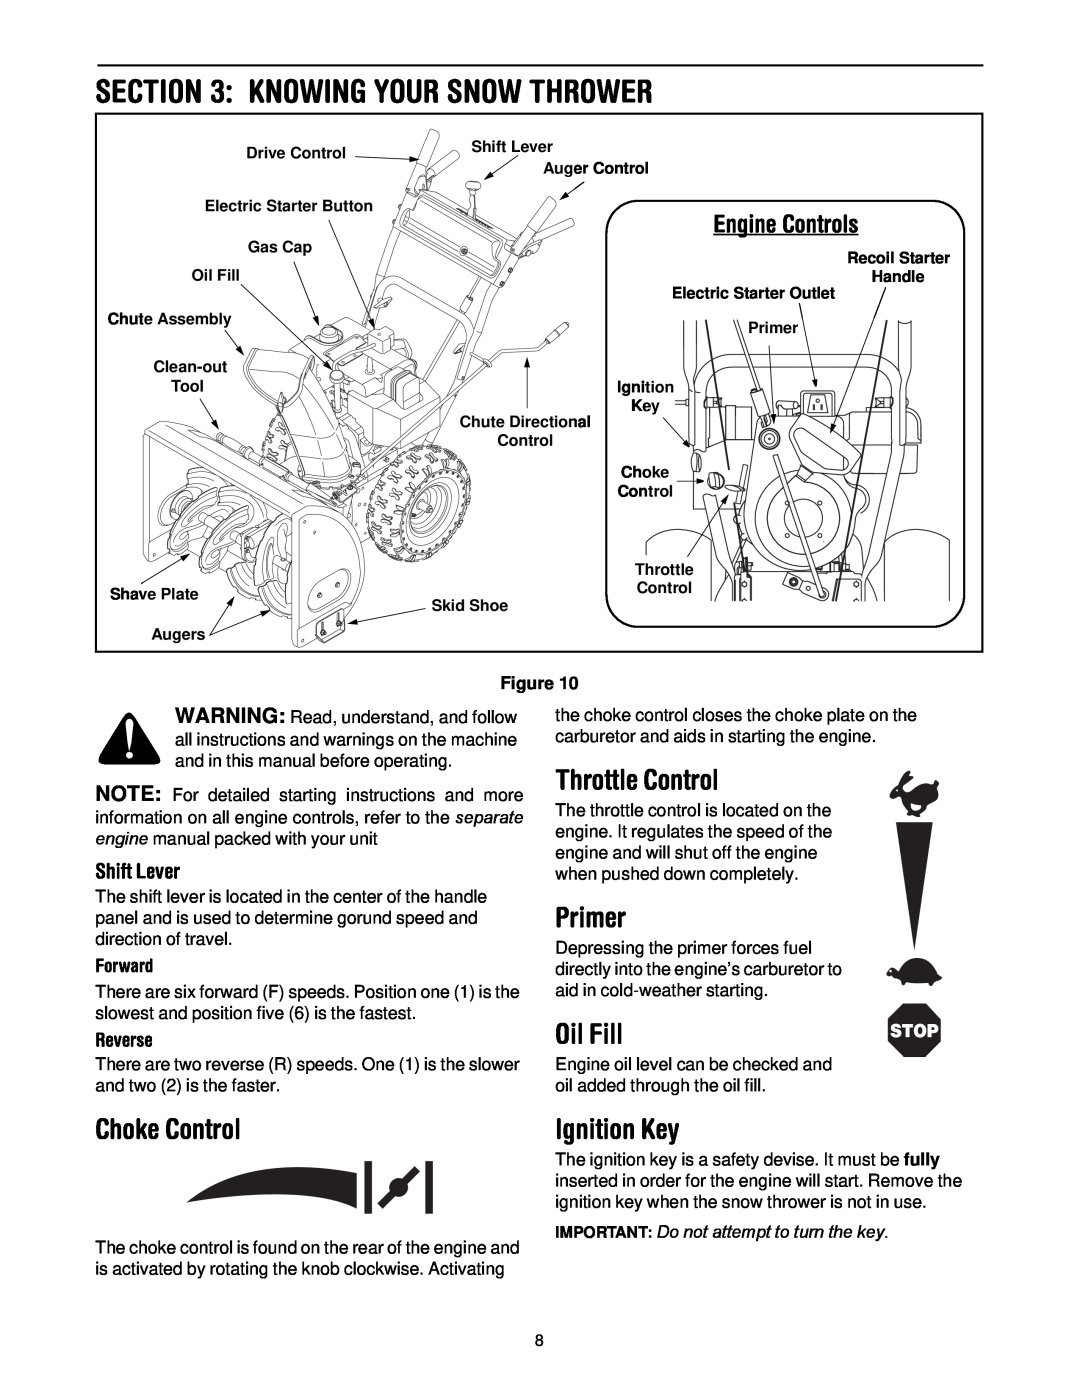 MTD 60-3754-4 Knowing Your Snow Thrower, Throttle Control, Primer, Oil Fill, Choke Control, Ignition Key, Engine Controls 